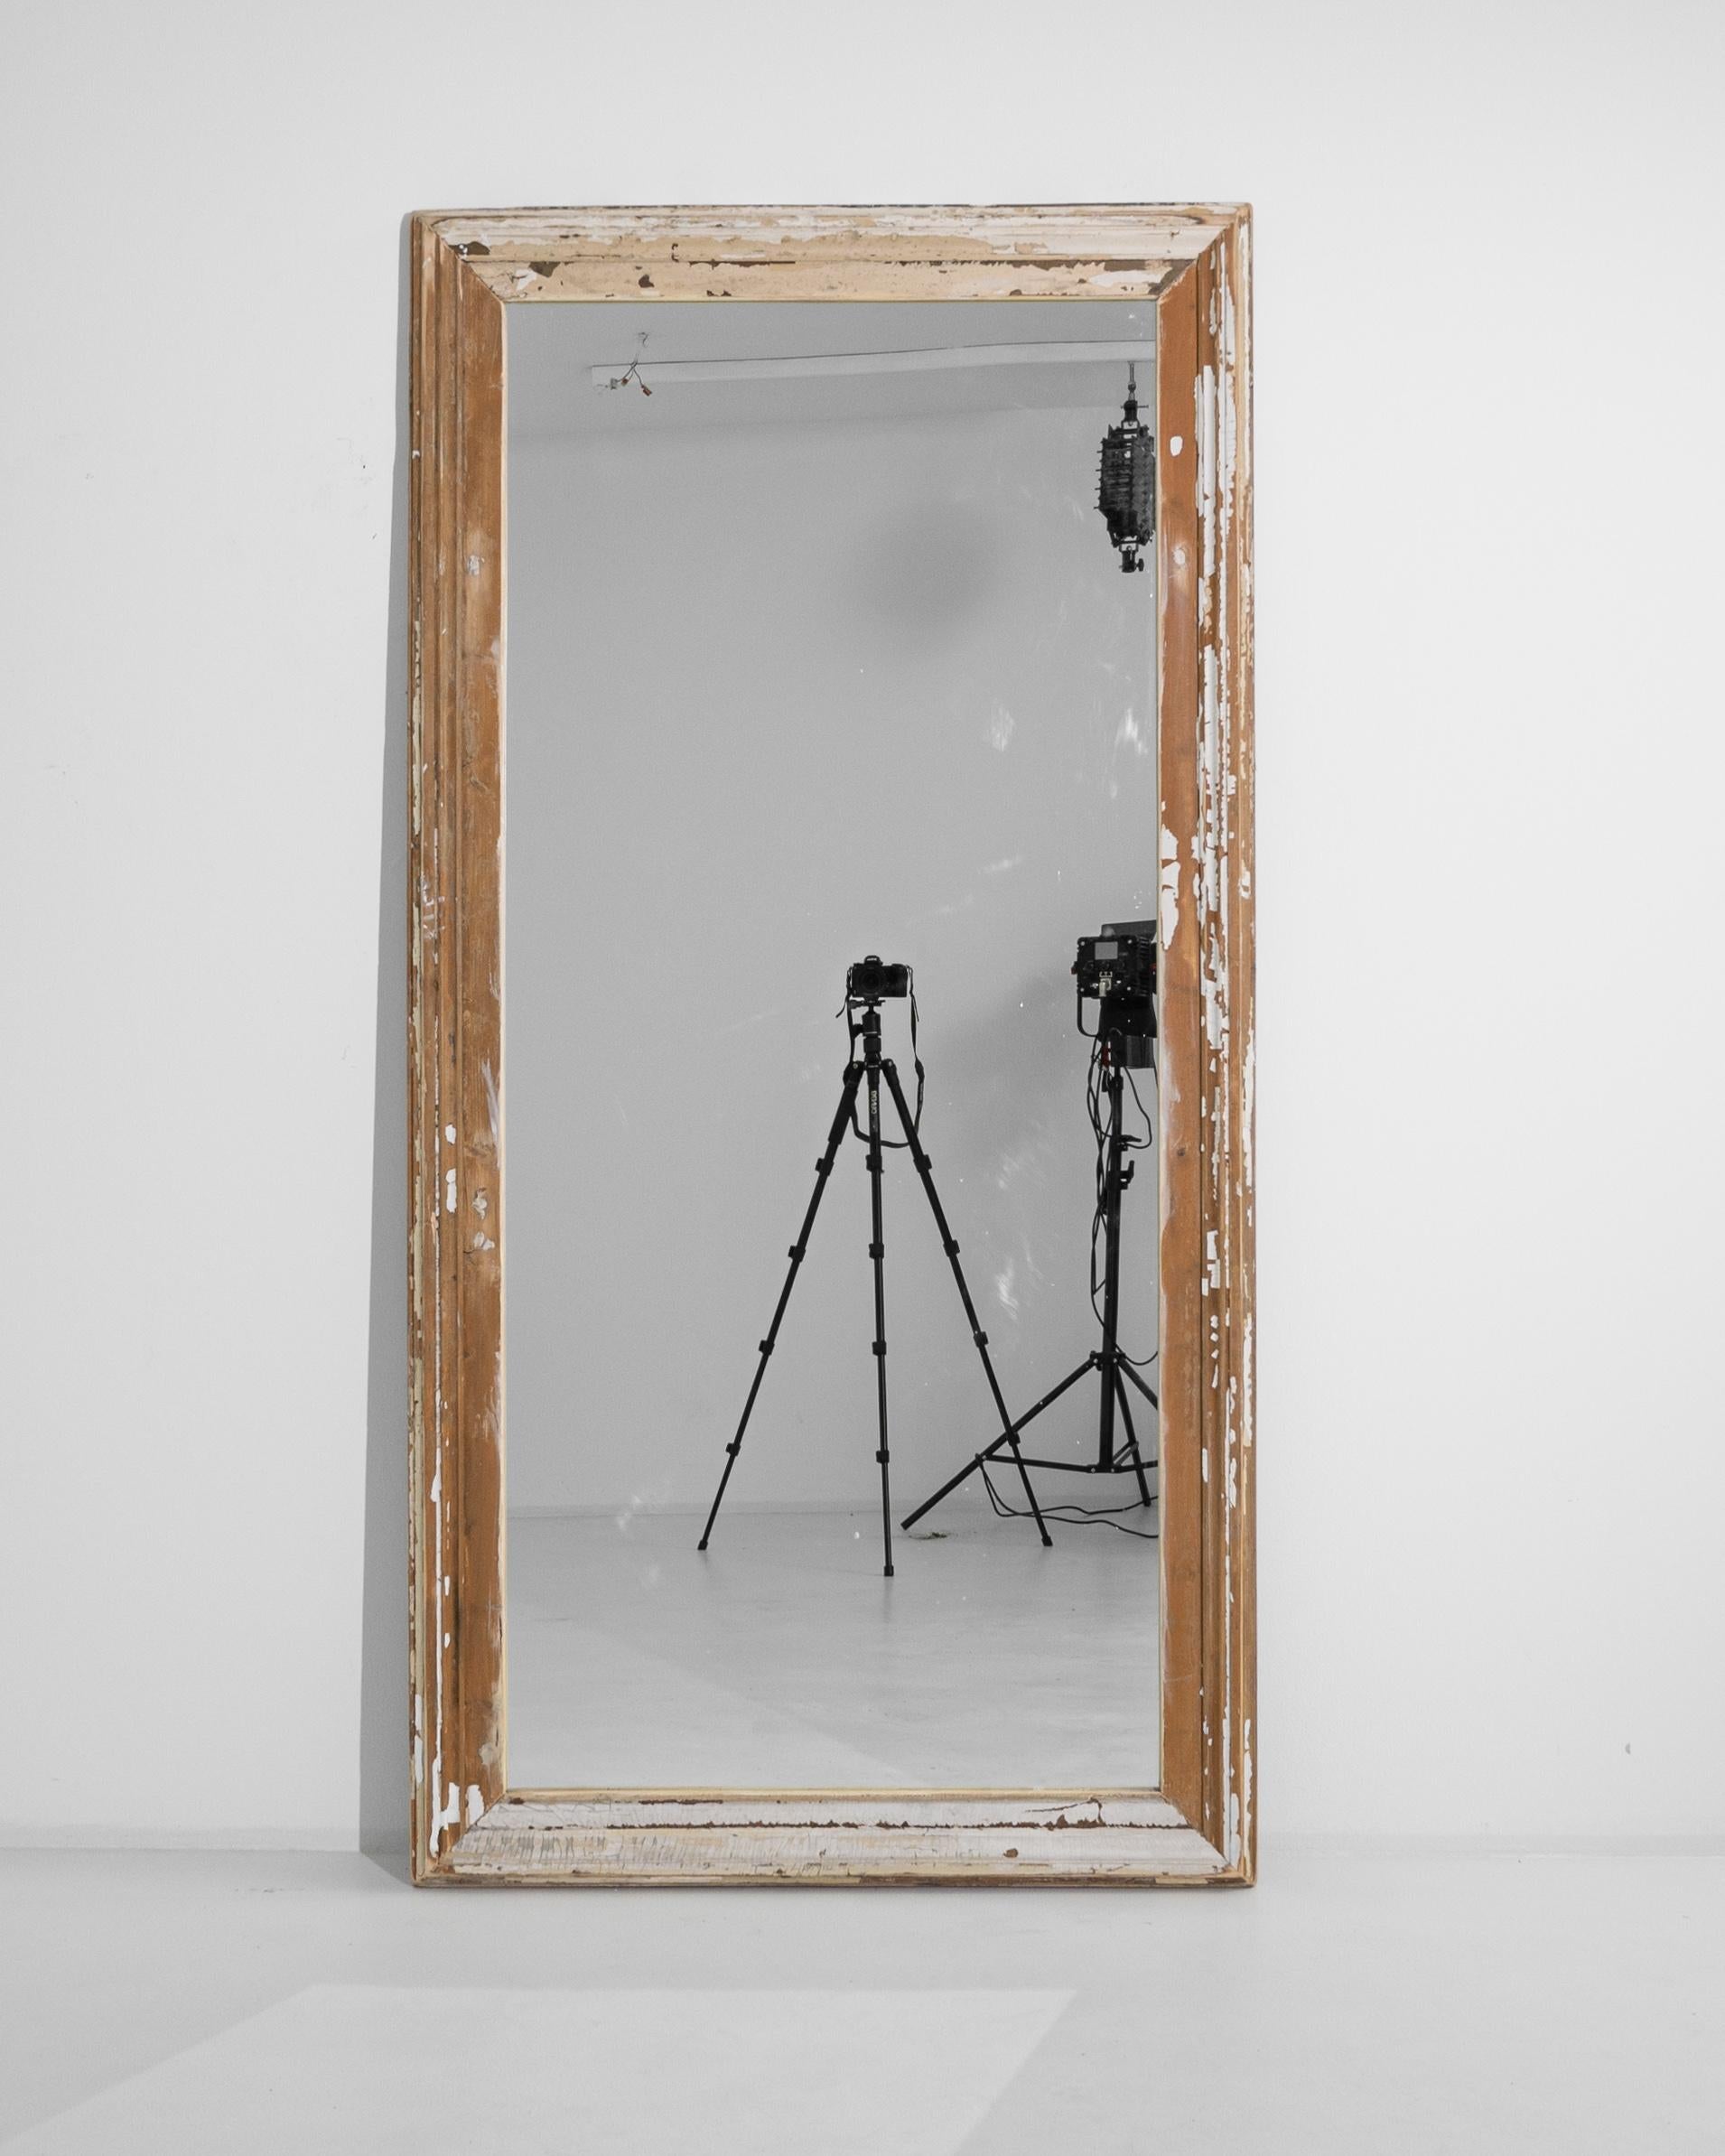 This 1900s French Wood Mirror exudes a shabby chic appeal that brings with it a sense of rustic elegance. The frame's white patina, bearing the gentle caress of time, tells its own story through each chip and scratch. Crafted in a period known for